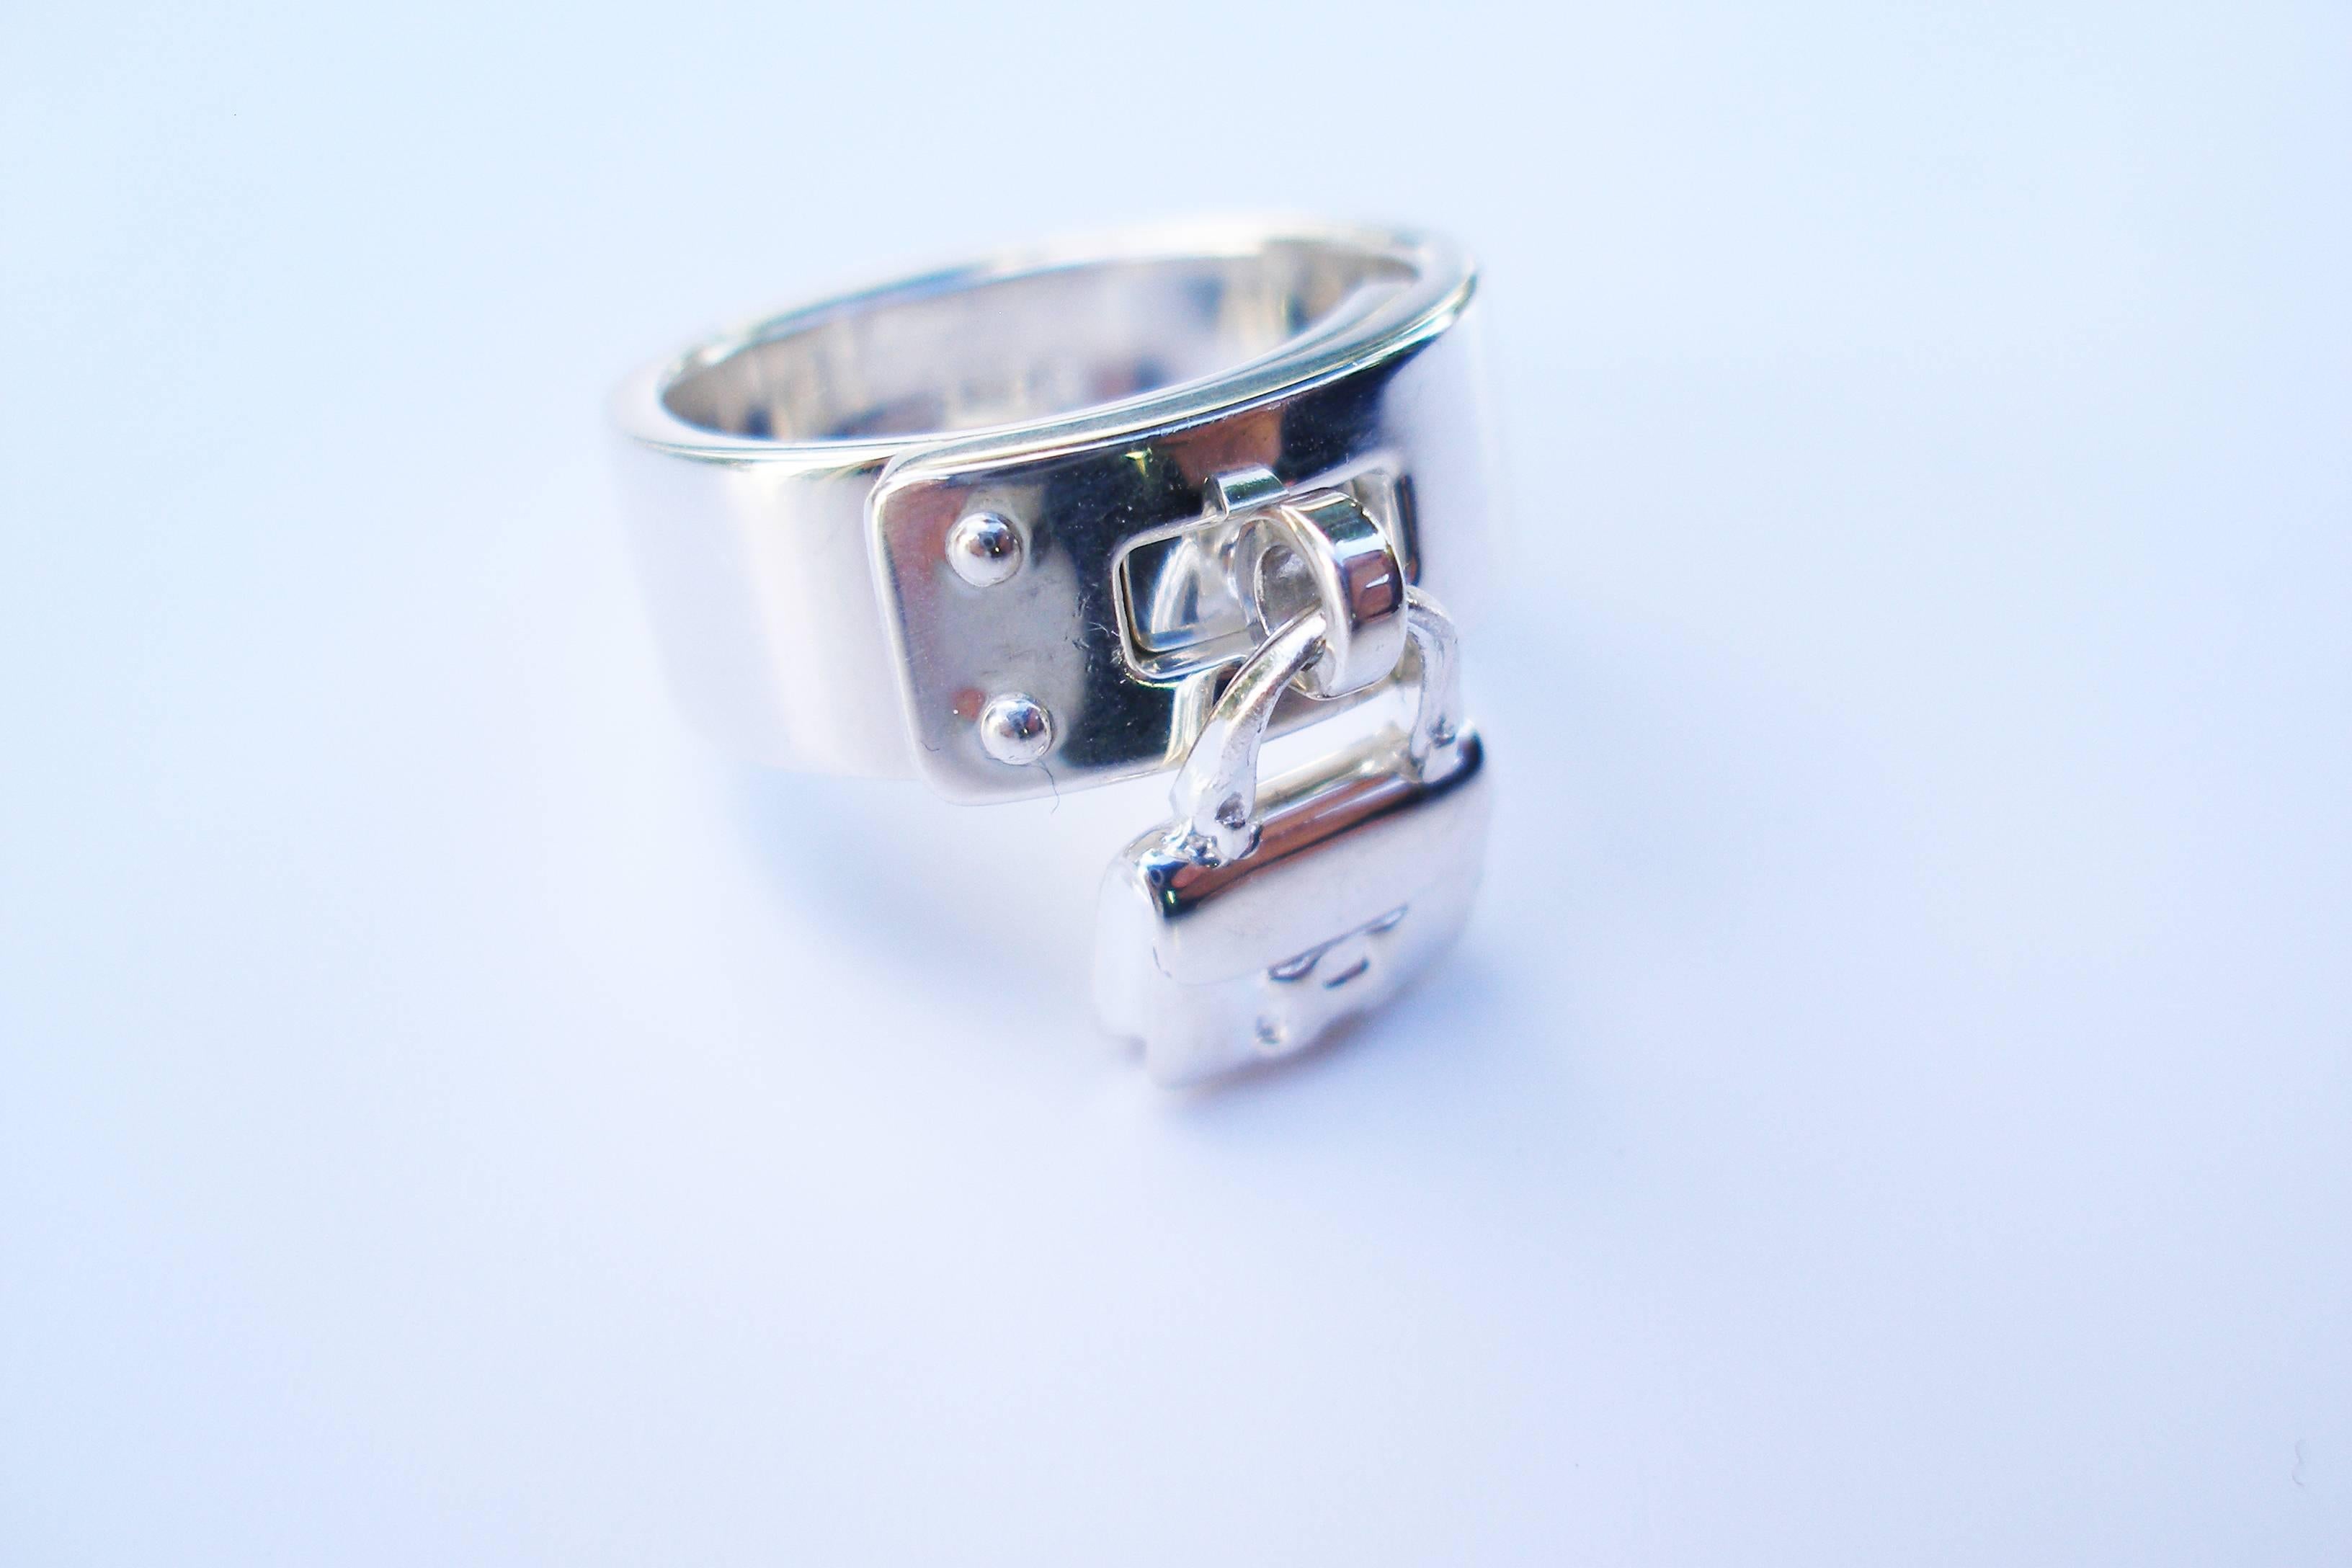 Magnific Hermès Ring
Modéle : Amulette Constance 
Size : French size : 54 or 13/13.5  usa size 
Width of the ring : 0.8 cm 
Weight 11.8 g
Dimensions Amulette Constance: 1 x 0.7 cm
Stamped Hermès Made in France 
PLEASE NOTE : 
Ring with micro